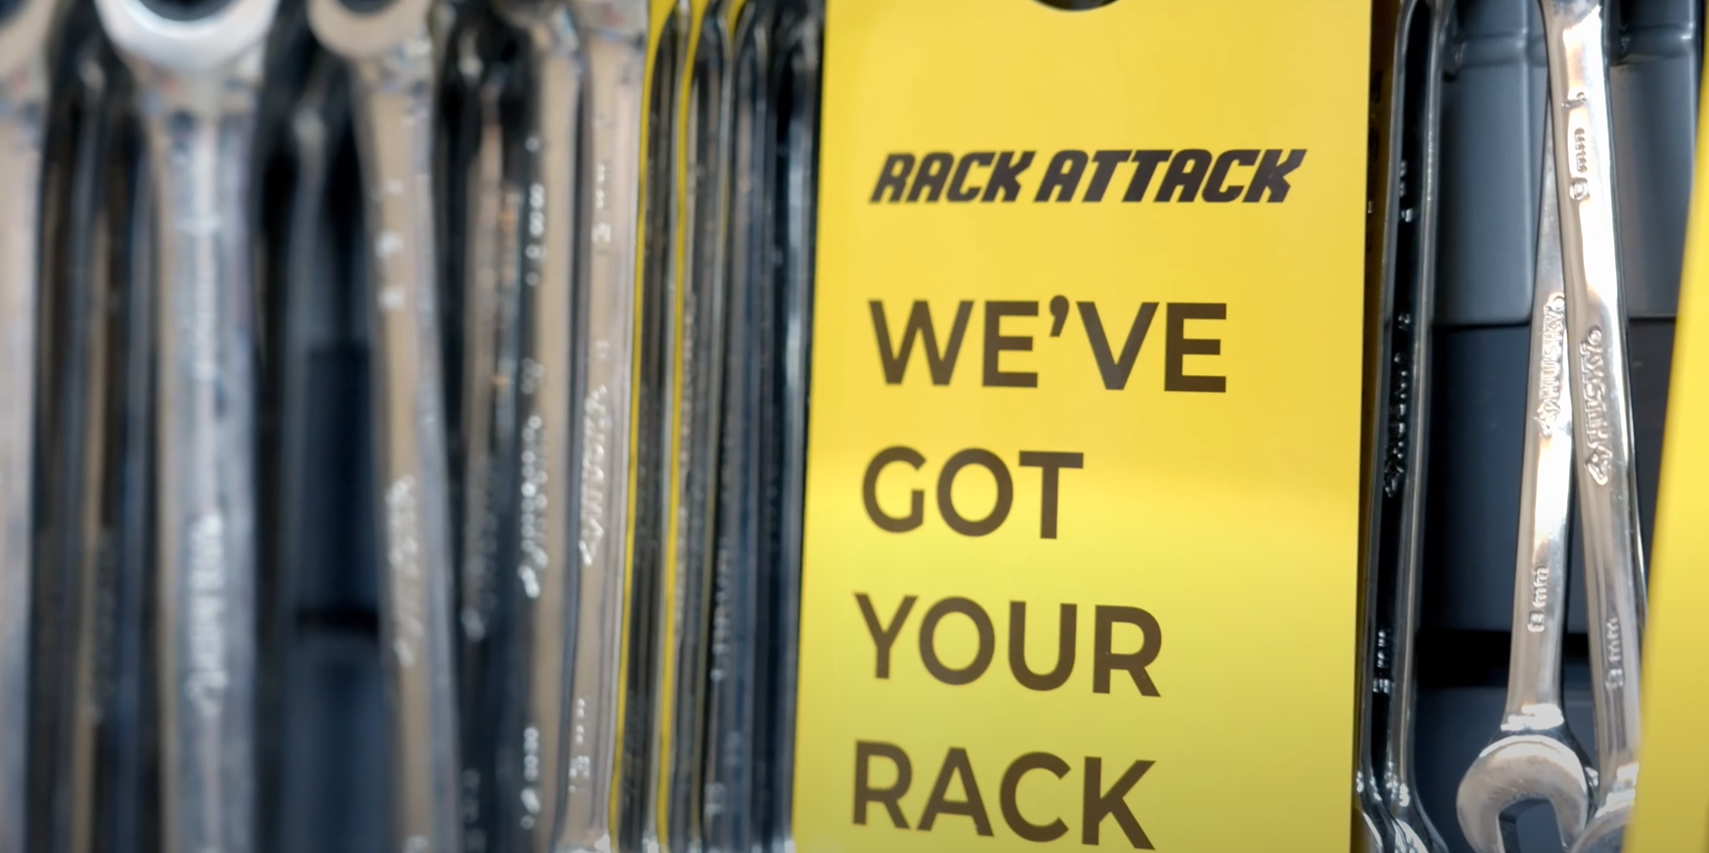 rack attack warranty and service we've got your rack hang tag